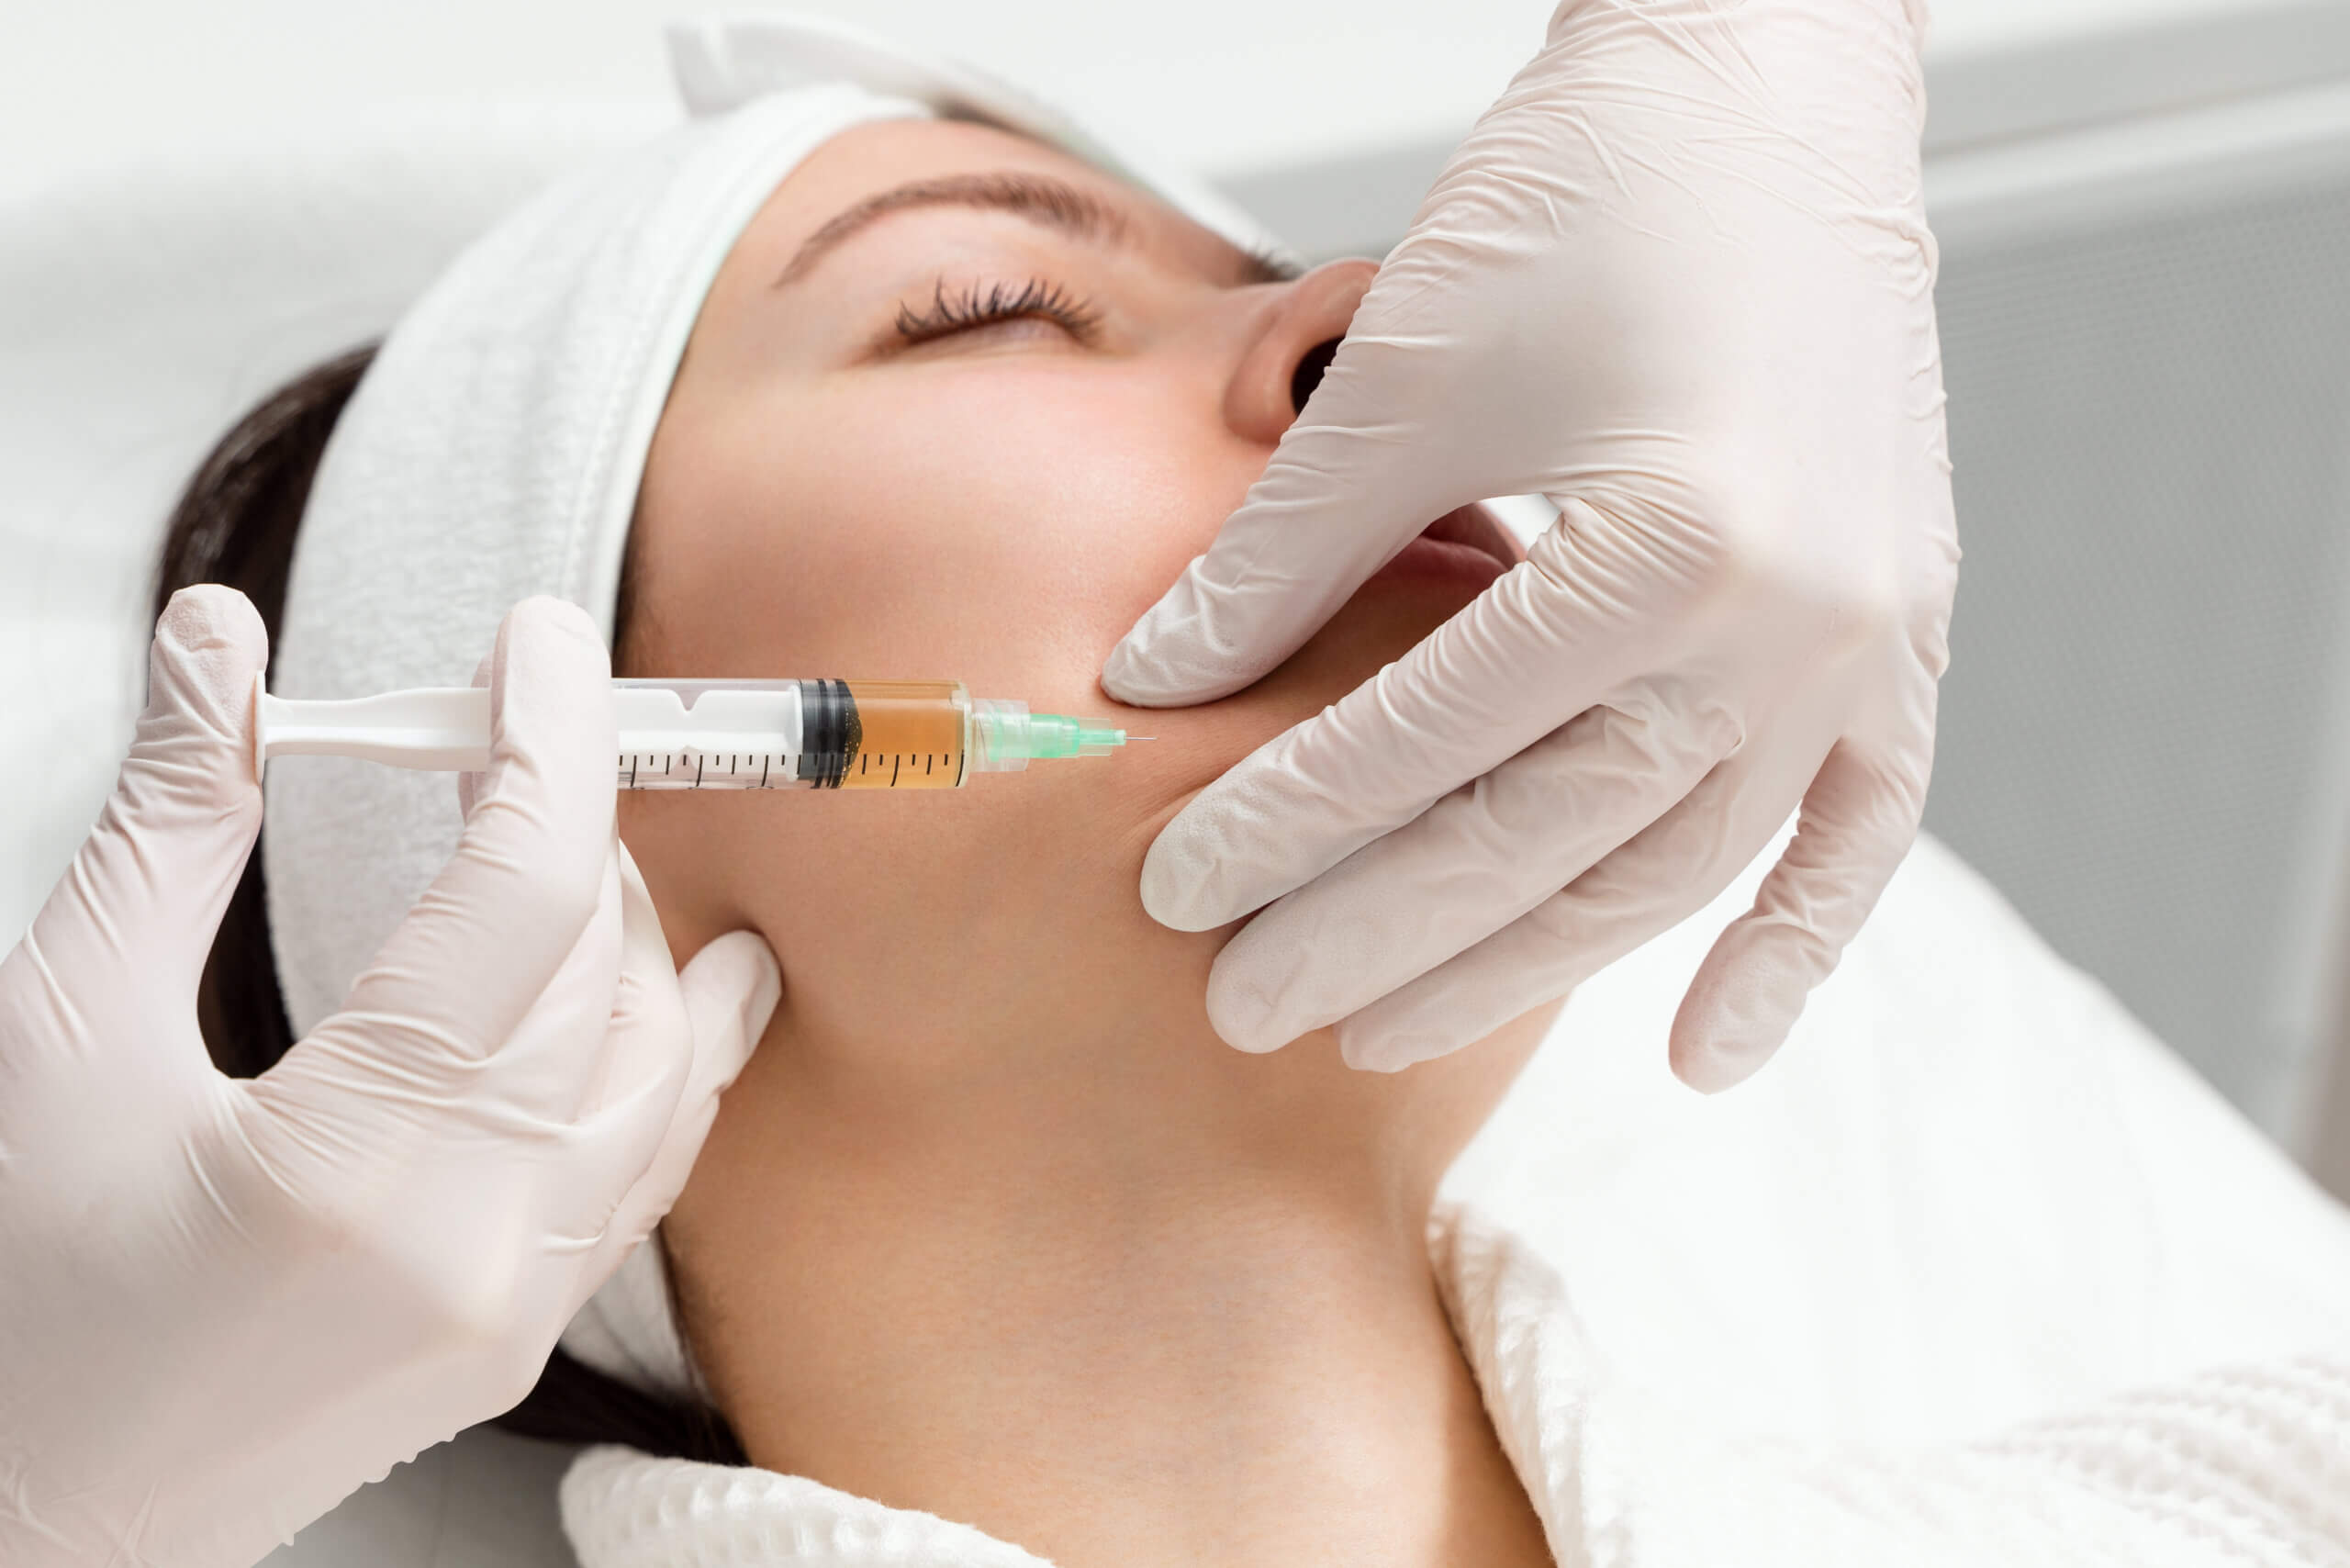 cosmetologist gives an injection into the cheekbones of a young woman.. doctor injecting hyaluronic acid into the ching of a woman as a facial rejuvenation treatment.